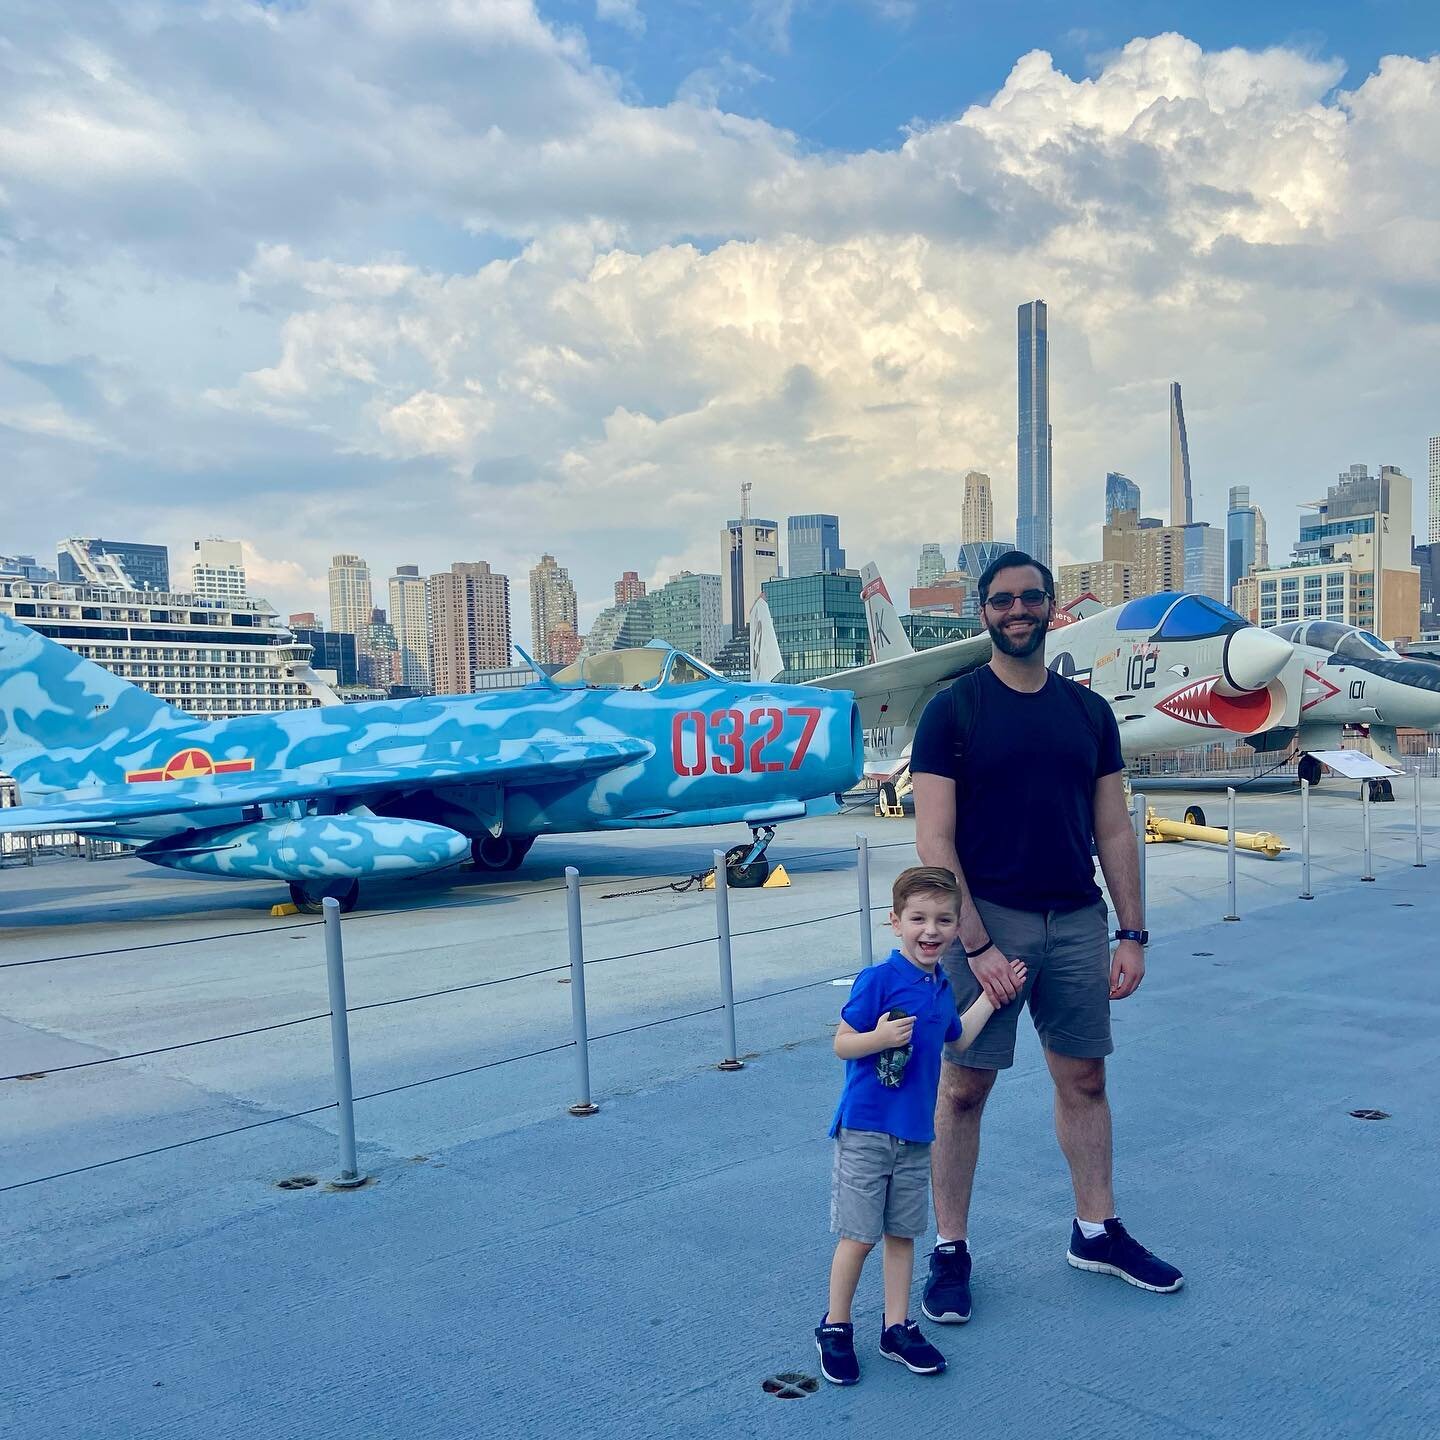 I&rsquo;ve been remiss about posting photos on here, but we had a very busy end-of-summer filled with adventures and exploration in our beautiful city. Here&rsquo;s one of my favorite shots from the incredible @intrepidmuseum. I would highly recommen